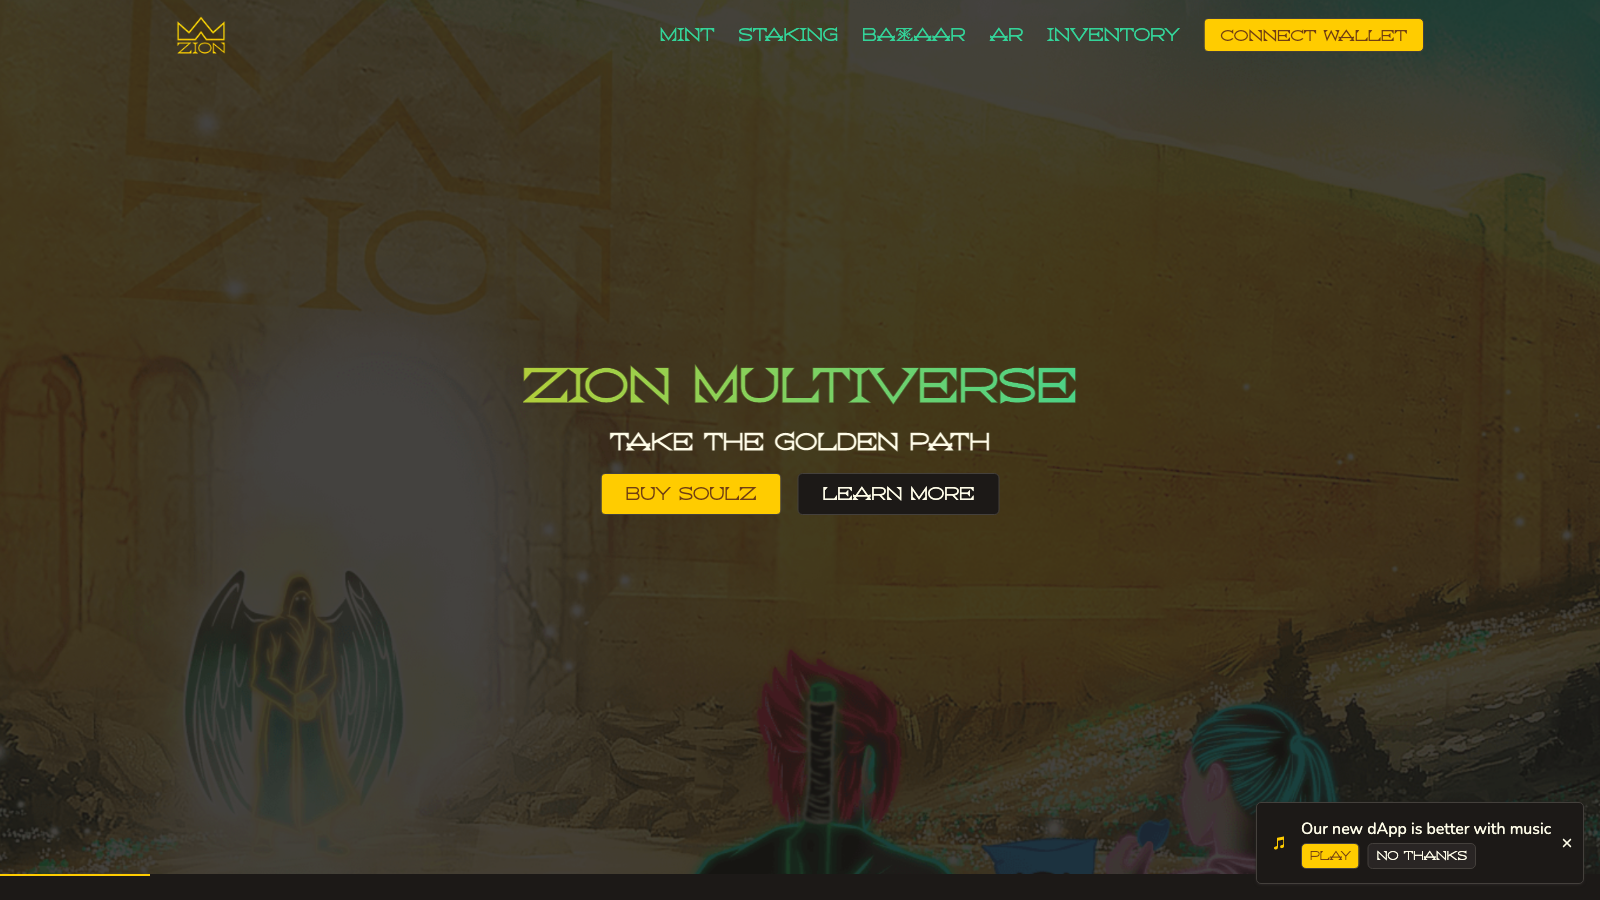 Image of the Zion Multiverse